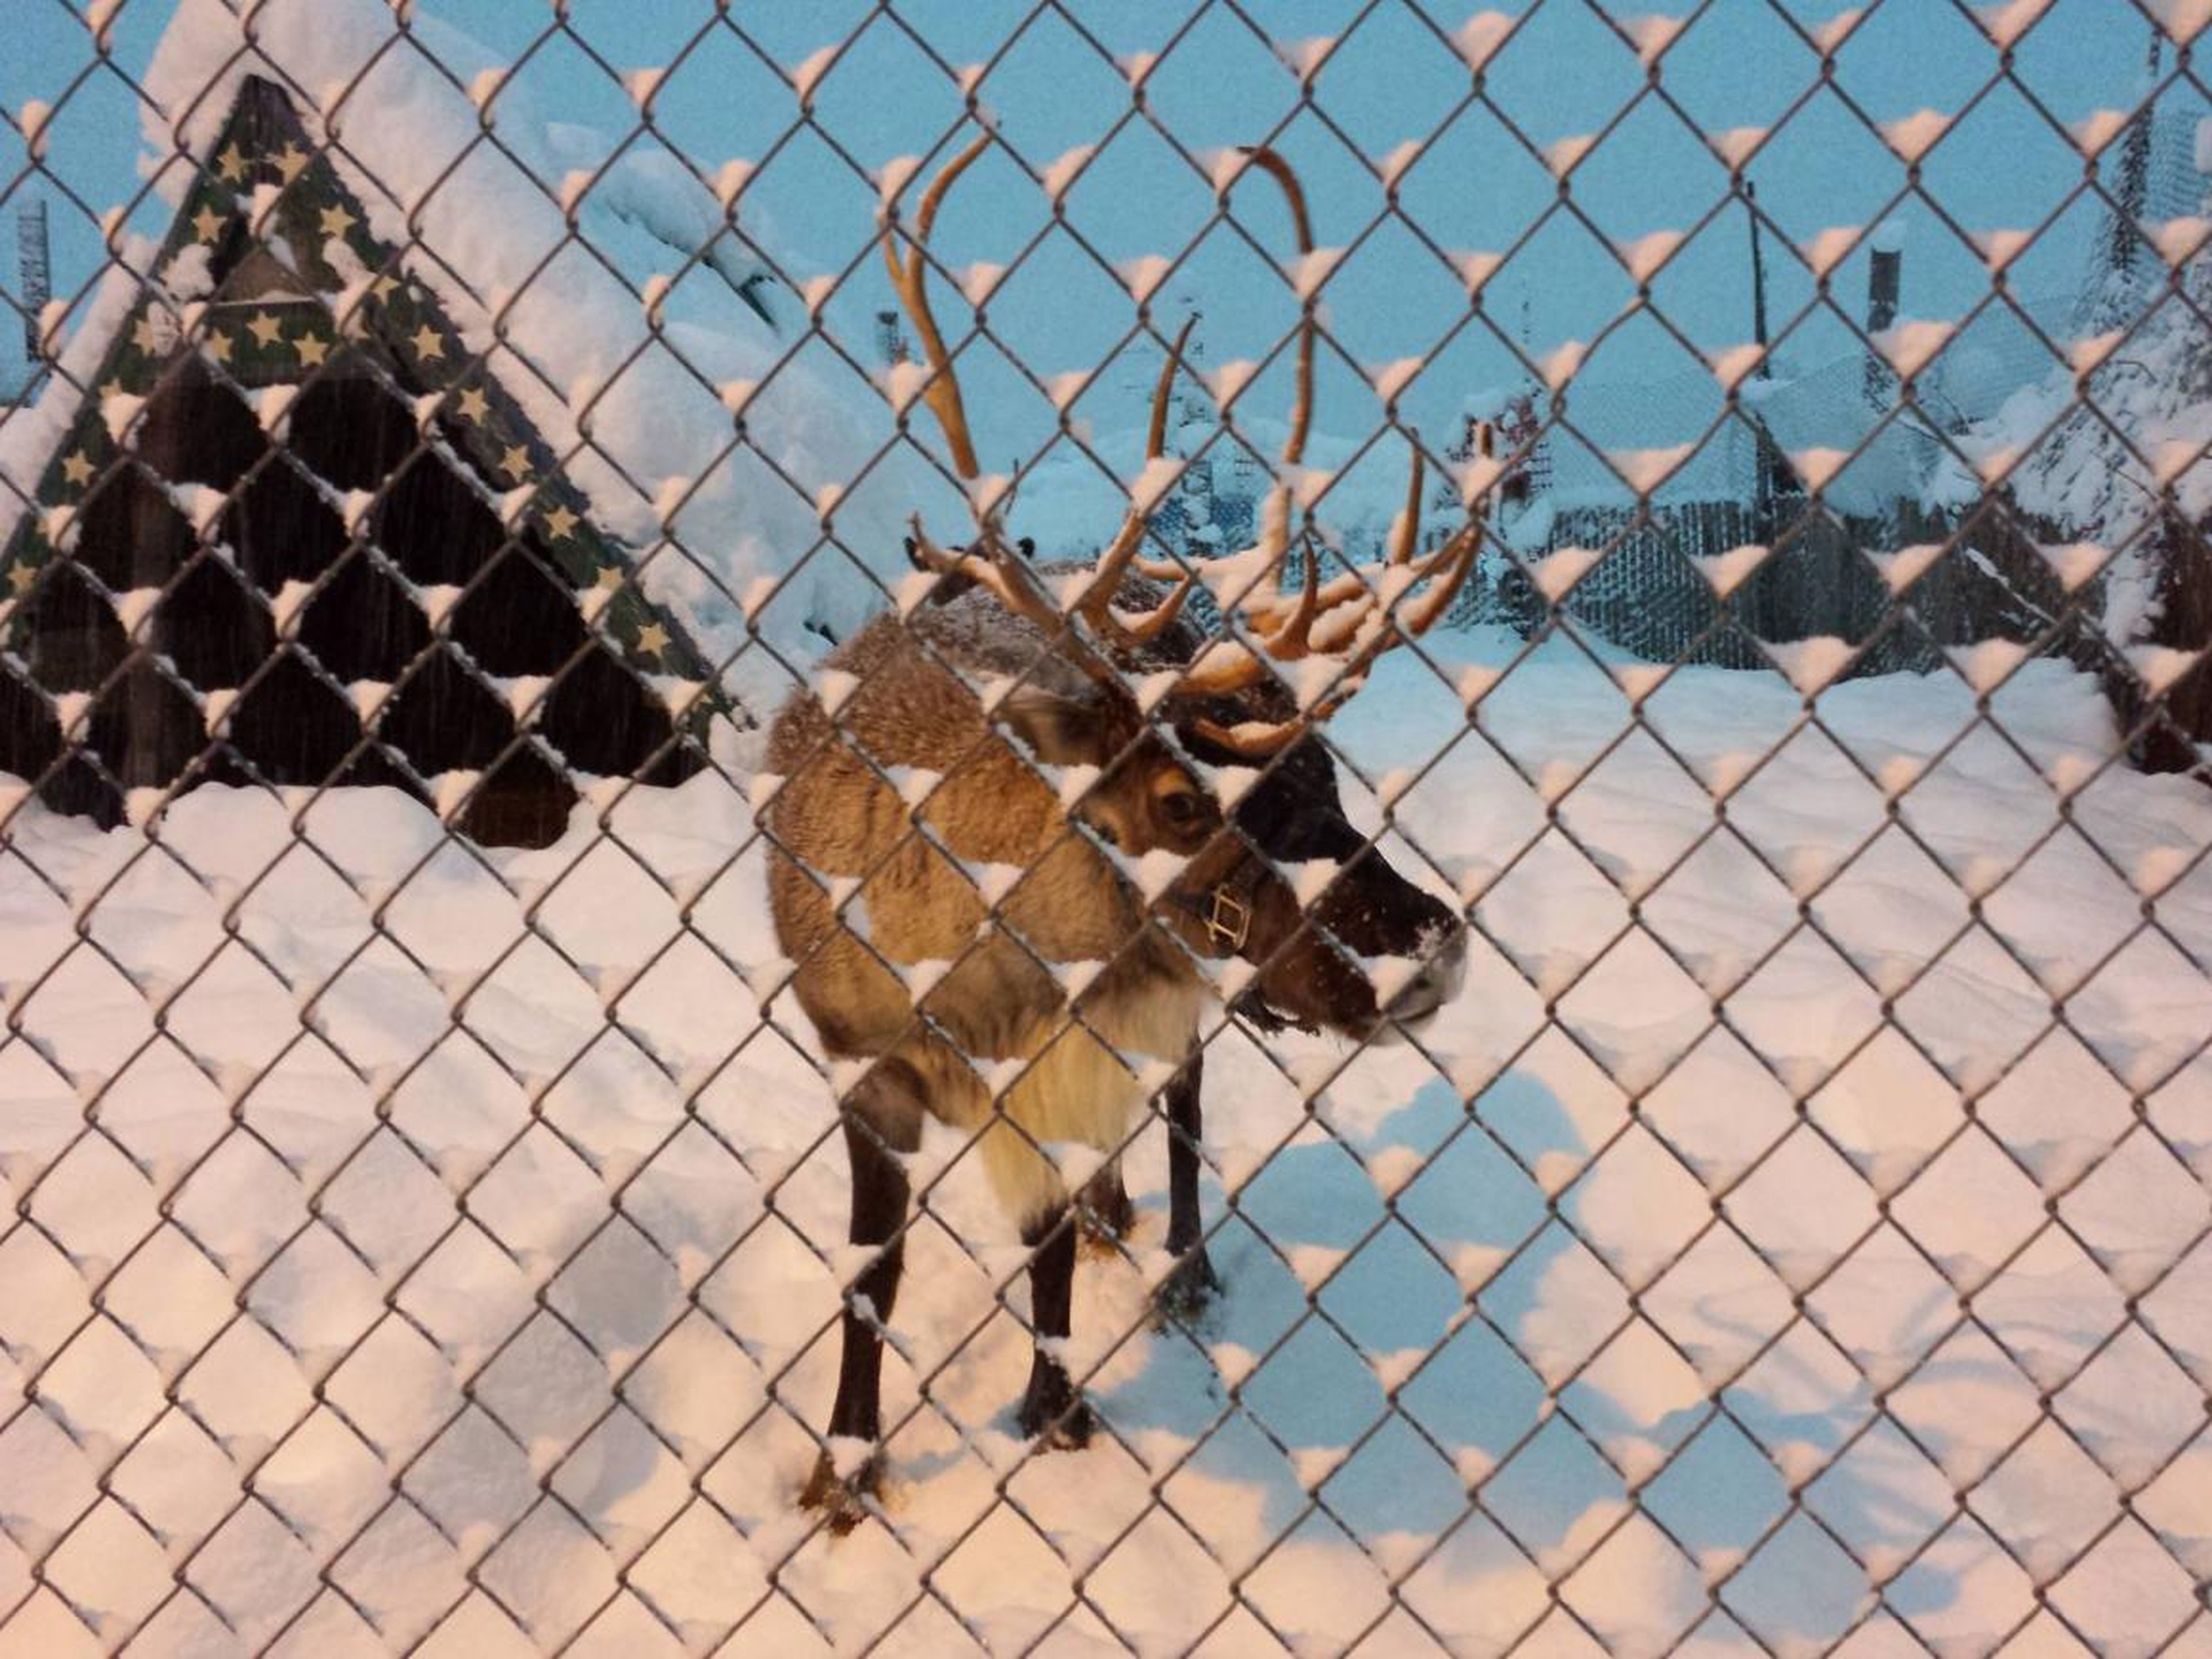 "There are reindeer in a pen right in front of the condo."